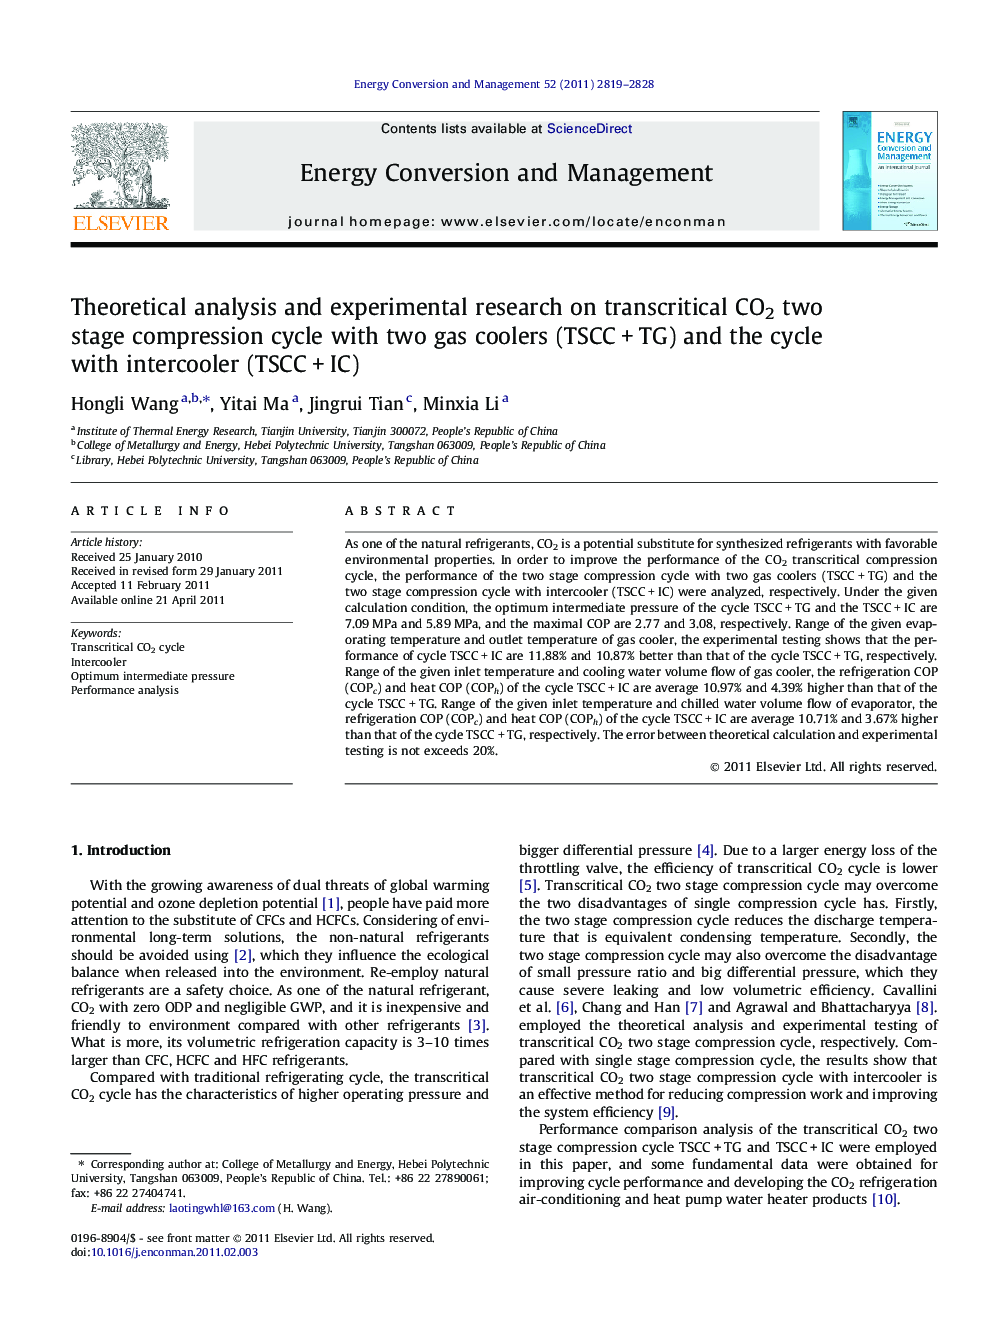 Theoretical analysis and experimental research on transcritical CO2 two stage compression cycle with two gas coolers (TSCC + TG) and the cycle with intercooler (TSCC + IC)